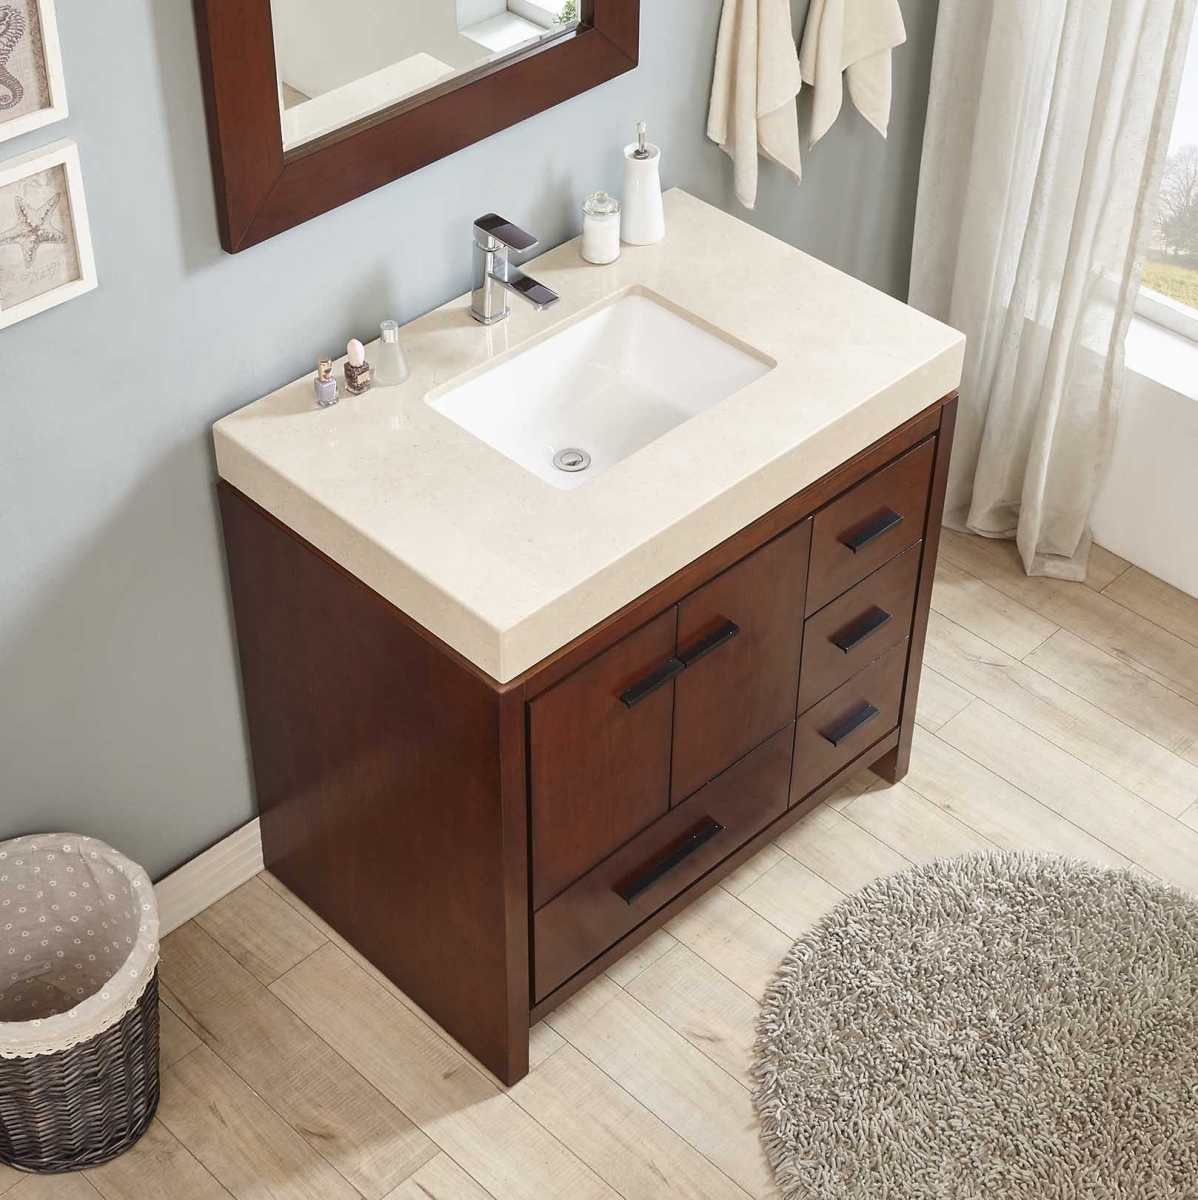 P36s-102e-cmm 36 In. Nadia Red Chestnut Single Vanity With Wide Line Undermount Sink - Cream Marfil Marble